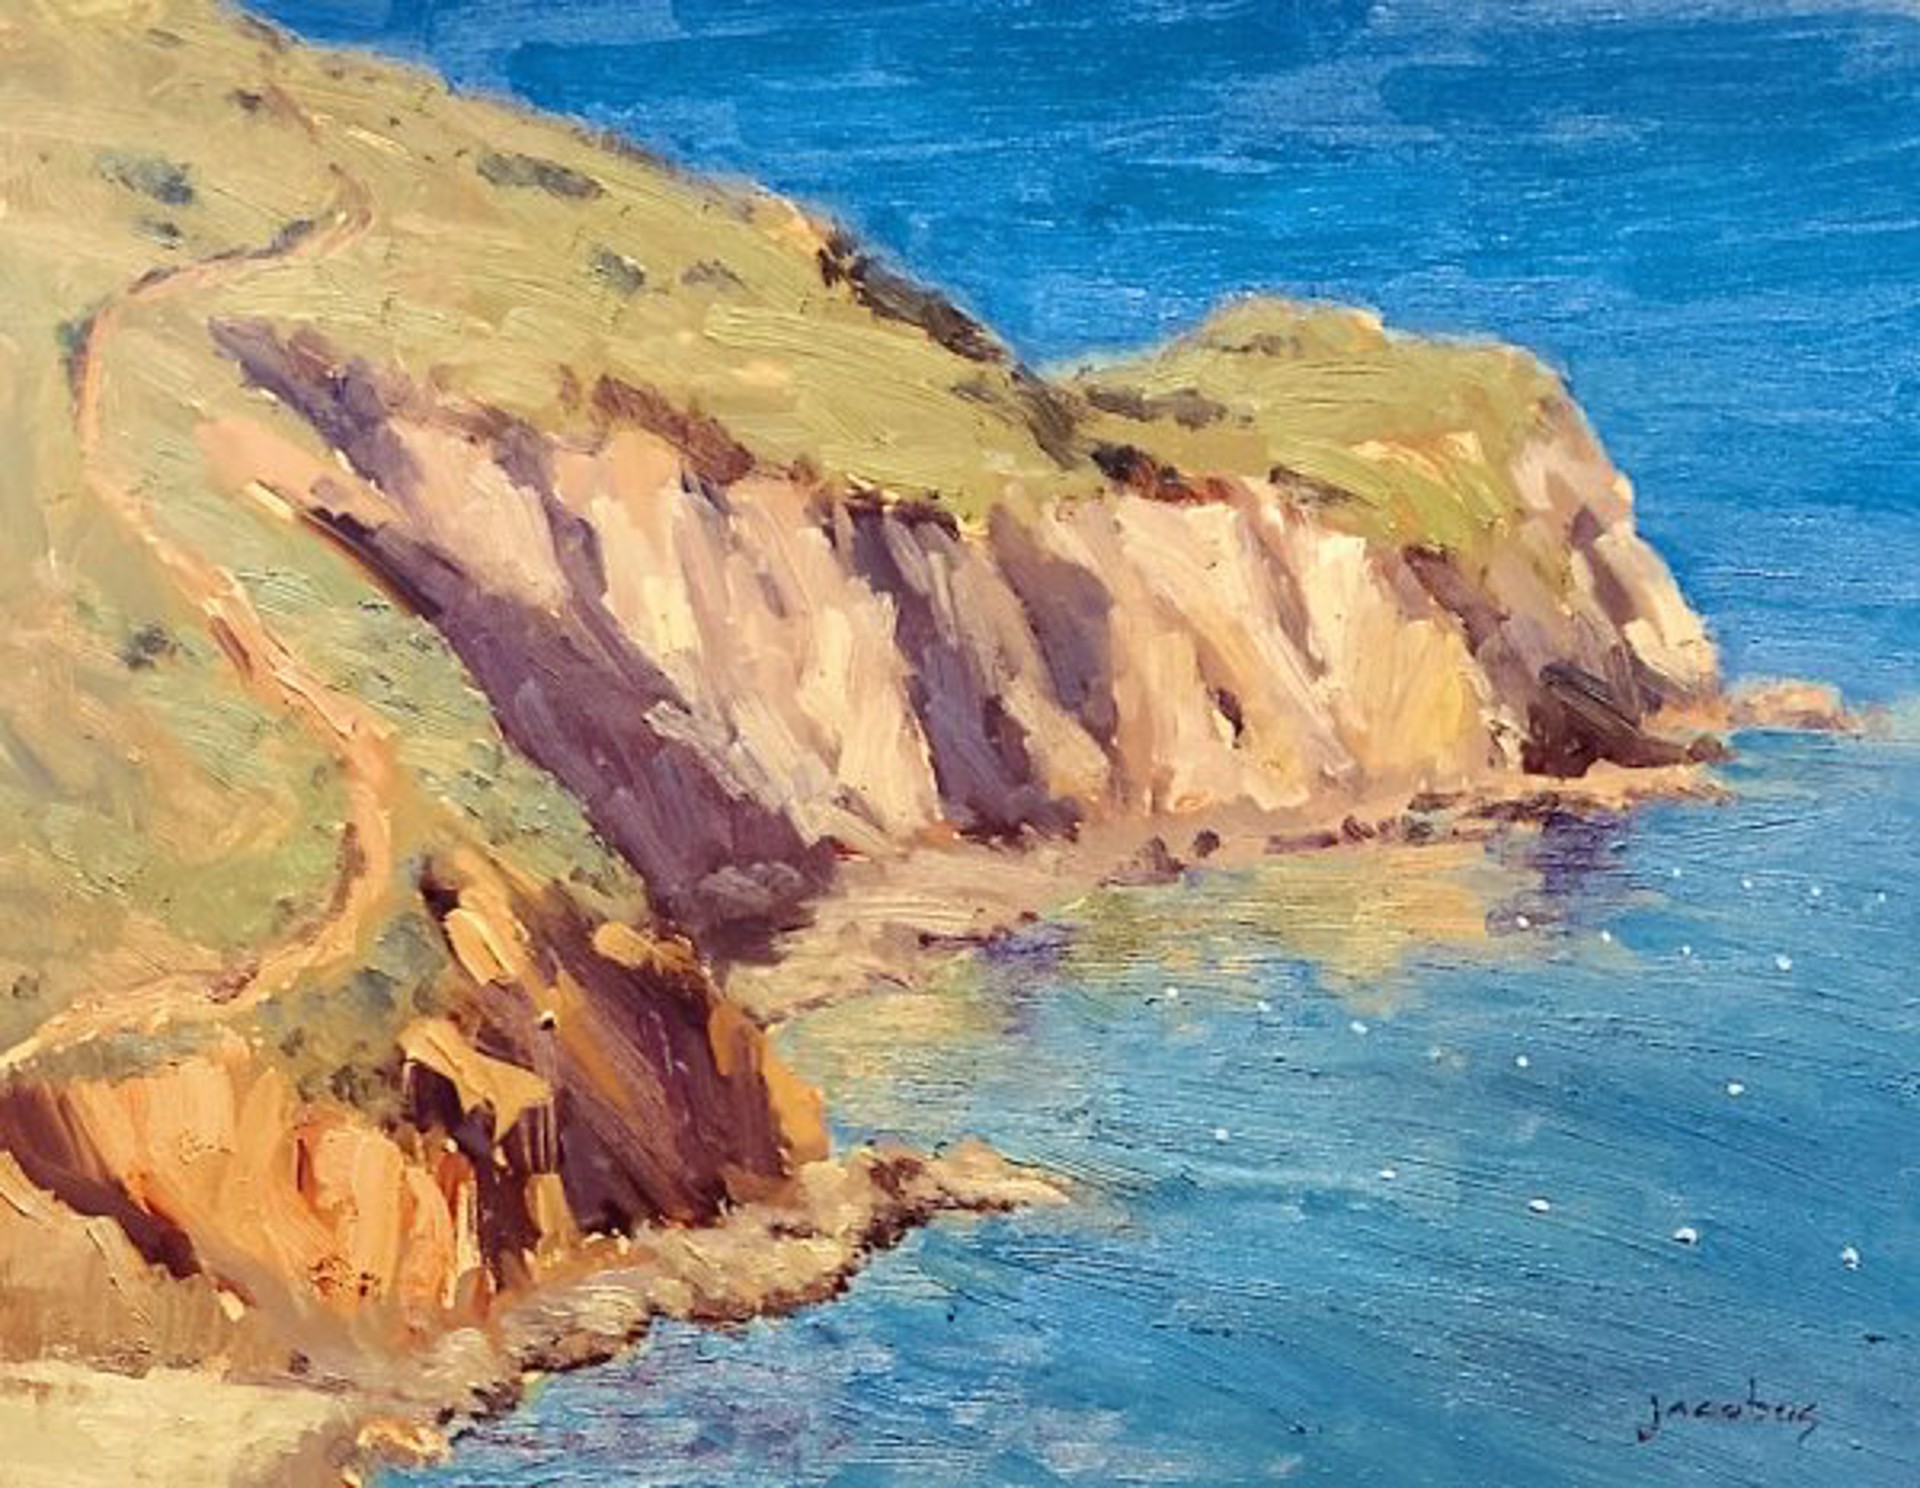 Cherry Cove, Catalina by Jacobus Baas